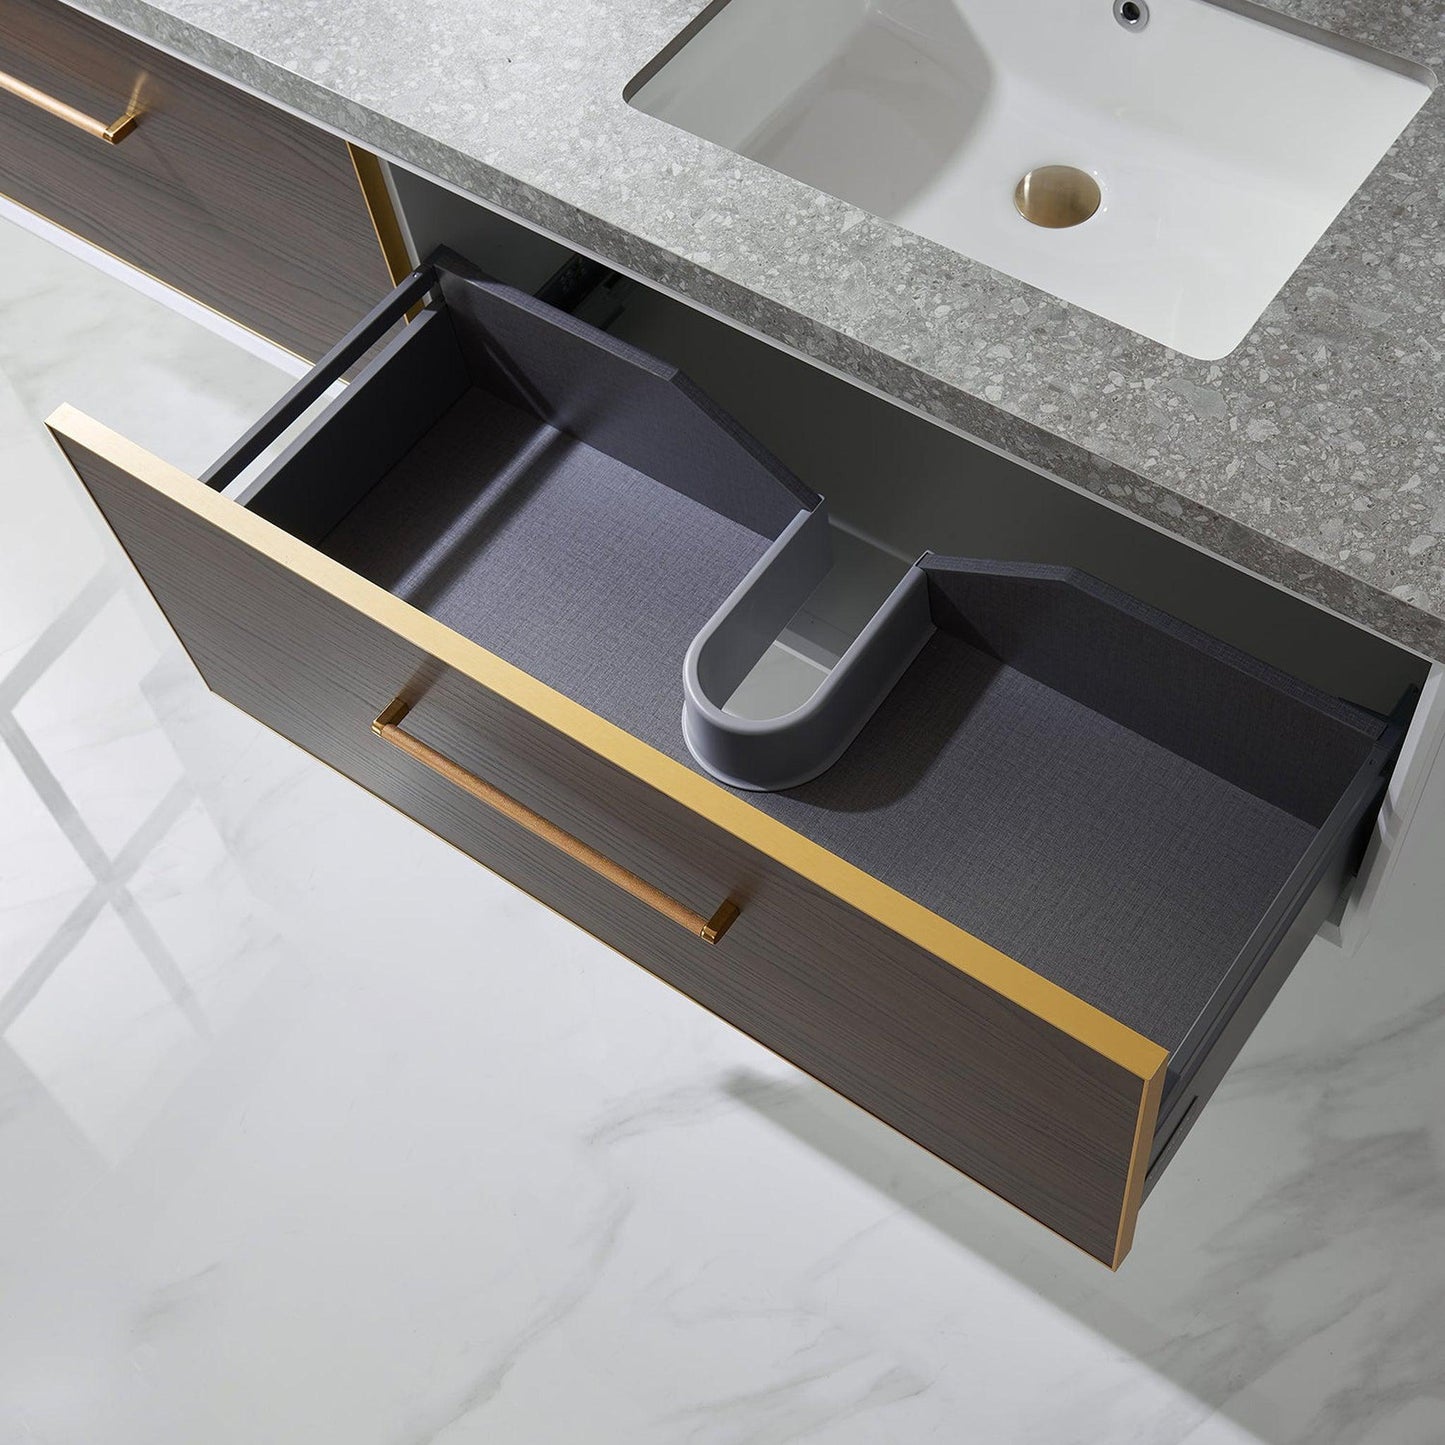 Vinnova Caparroso 72" Double Sink Floating Bathroom Vanity In Dark Walnut And Brushed Gold Hardware Finish With Grey Sintered Stone Top